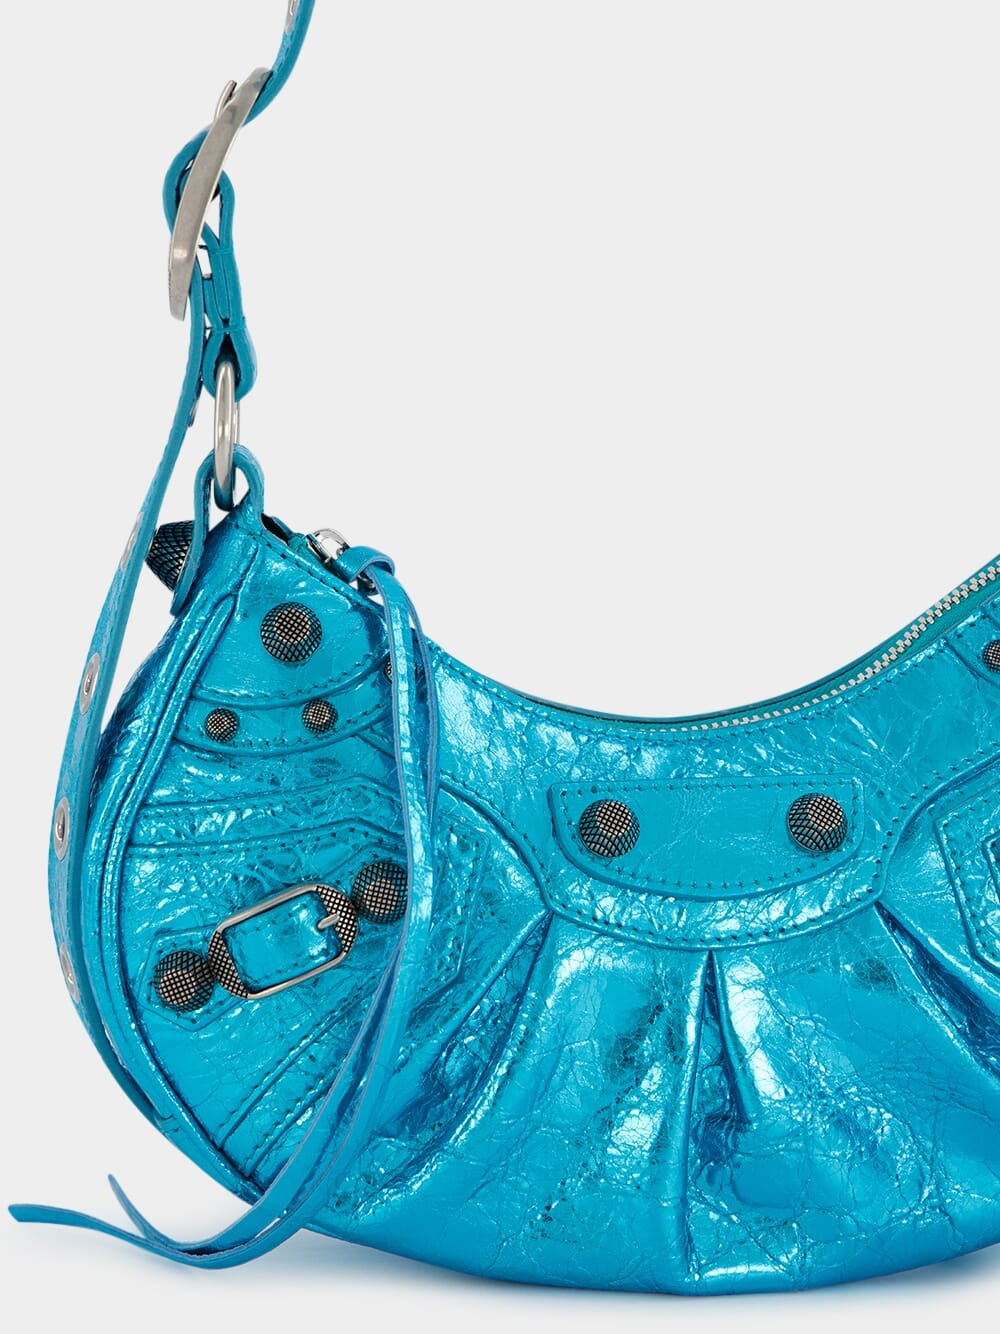 BalenciagaLe Cagole XS Shoulder Bag Metallized at Fashion Clinic